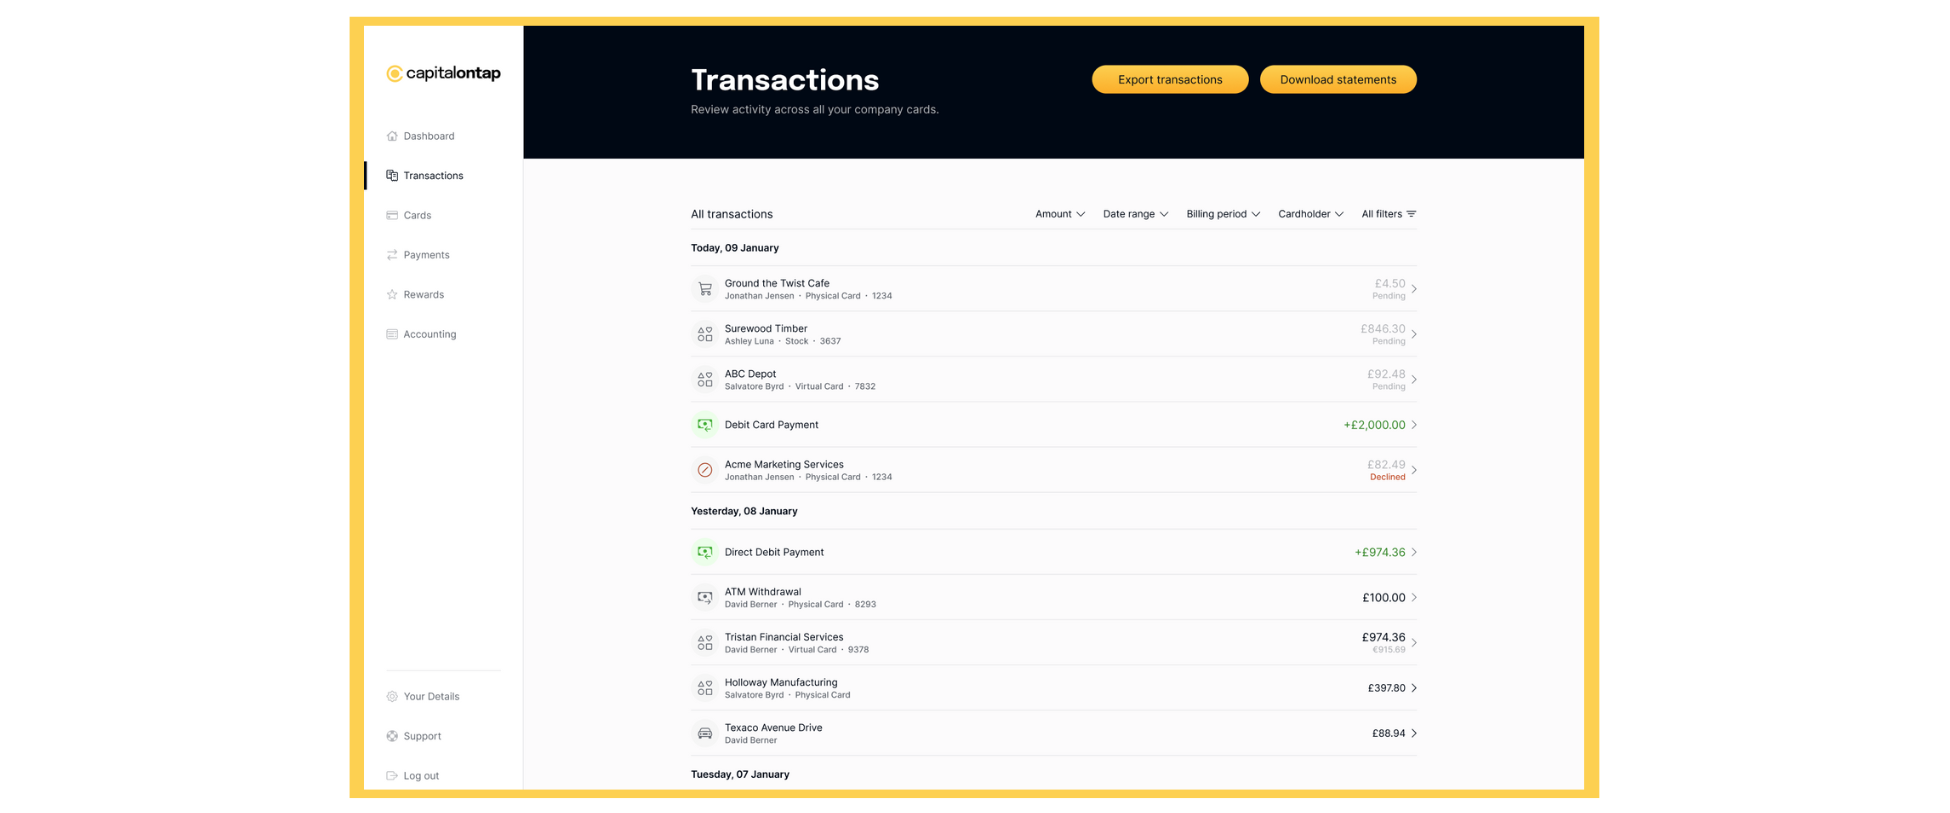 A screenshot of the new transaction view on Capital on Tap's transaction page in the online portal